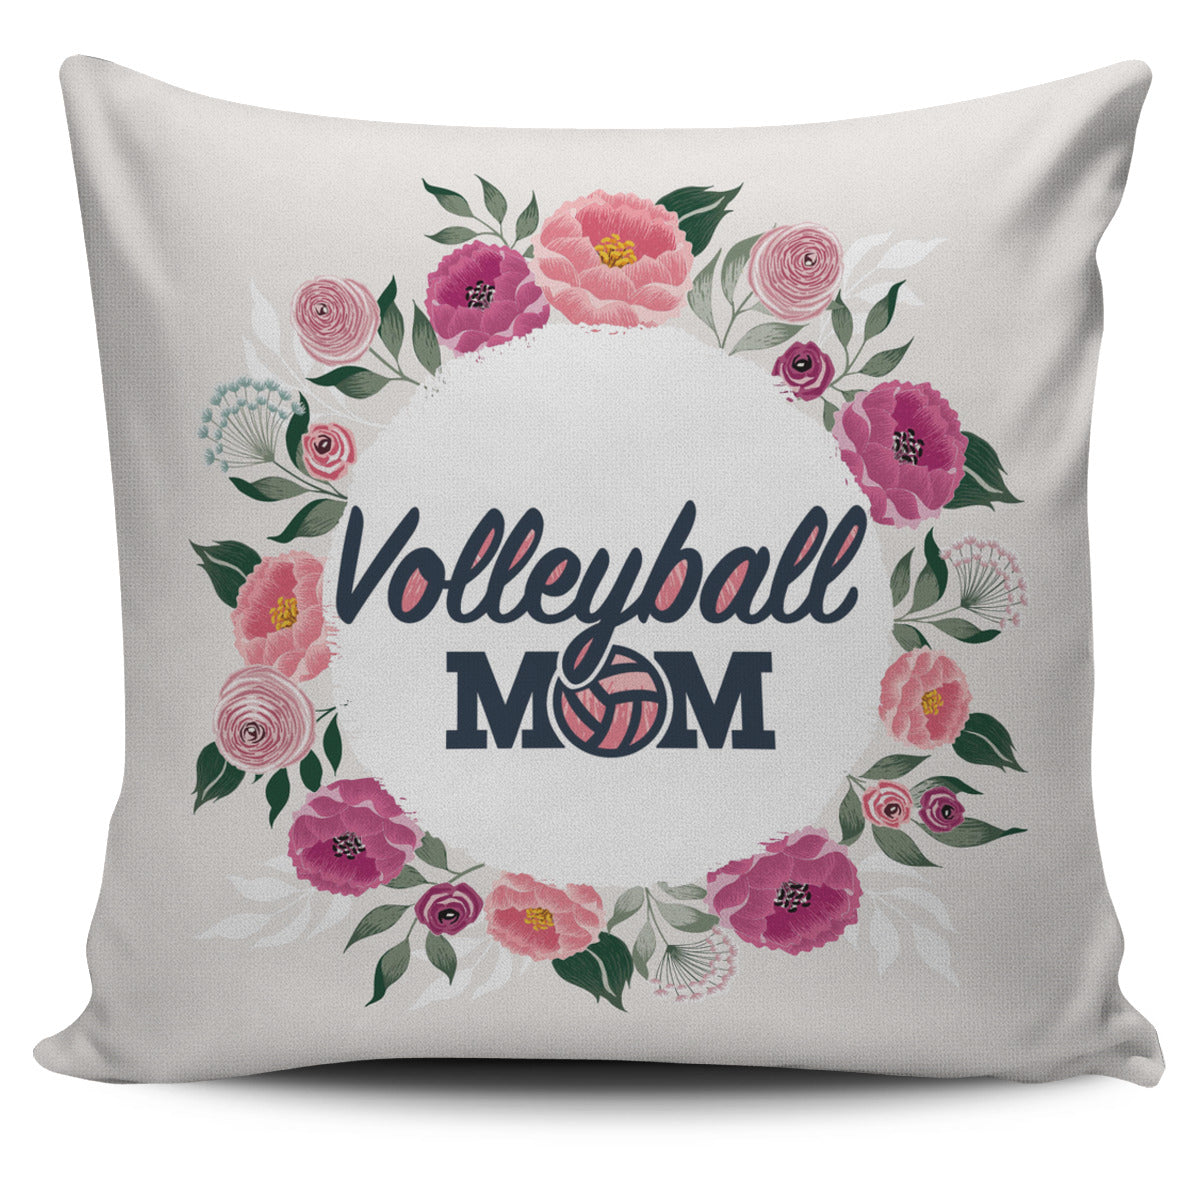 Volleyball Mom Pillow Cover